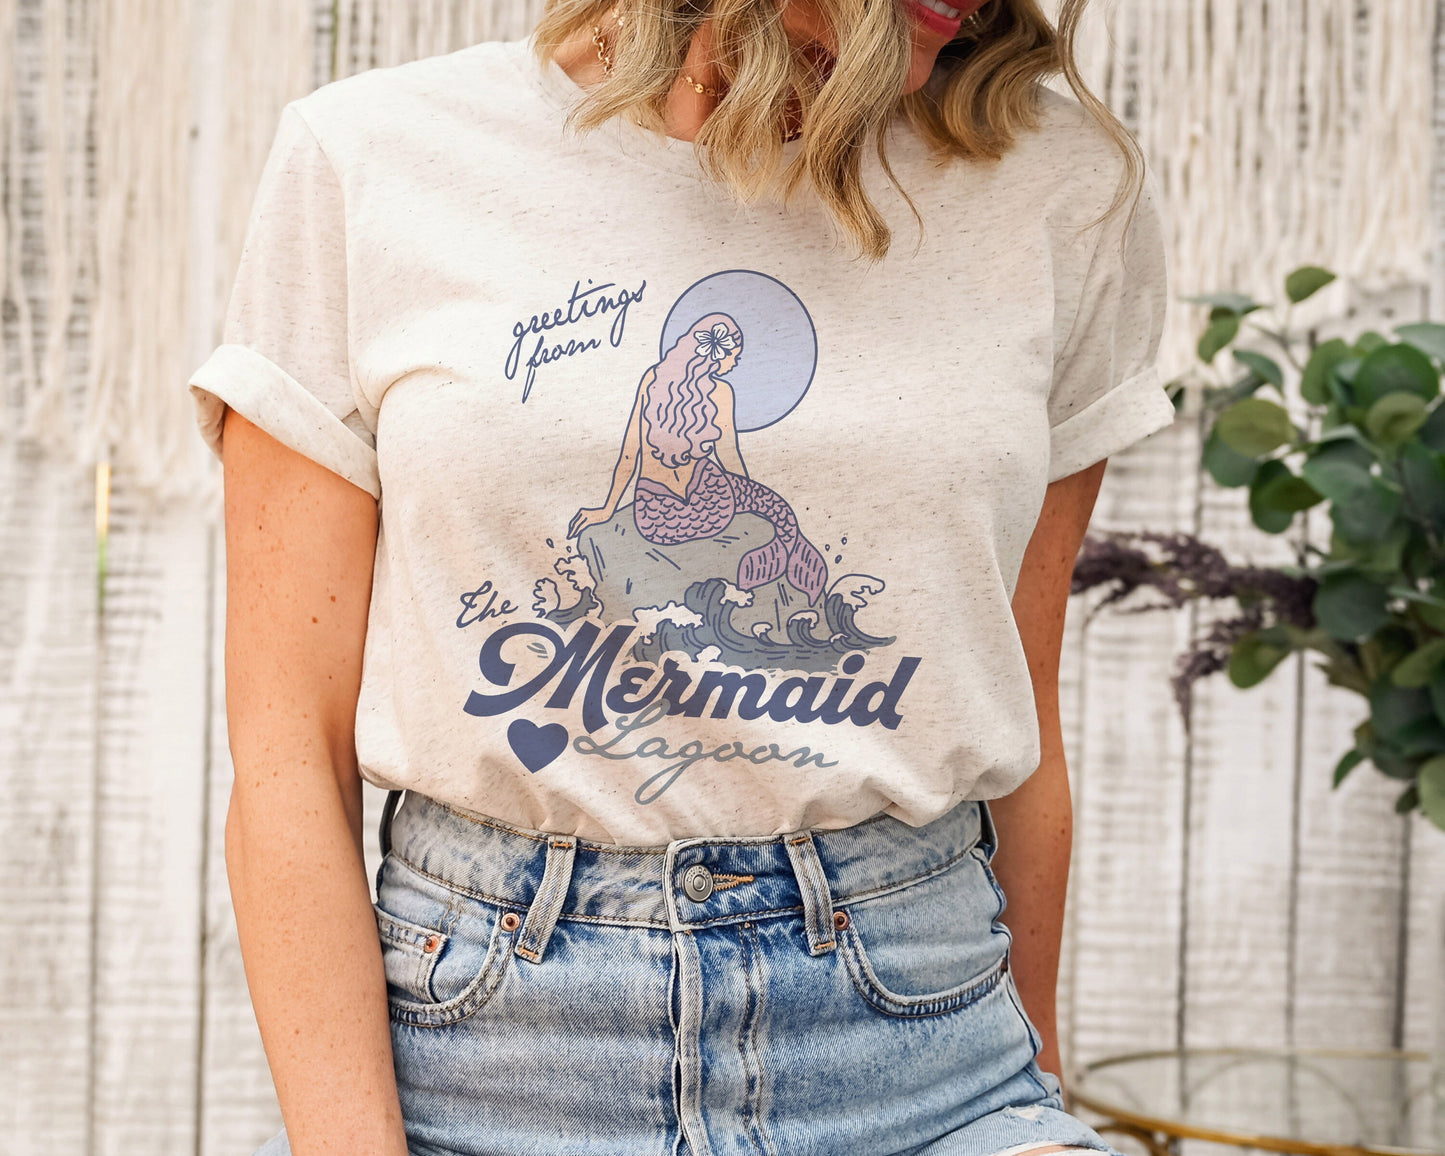 Greetings From Mermaid Lagoon Ultra Soft Graphic Tee Unisex Soft Tee T-shirt for Women or Men